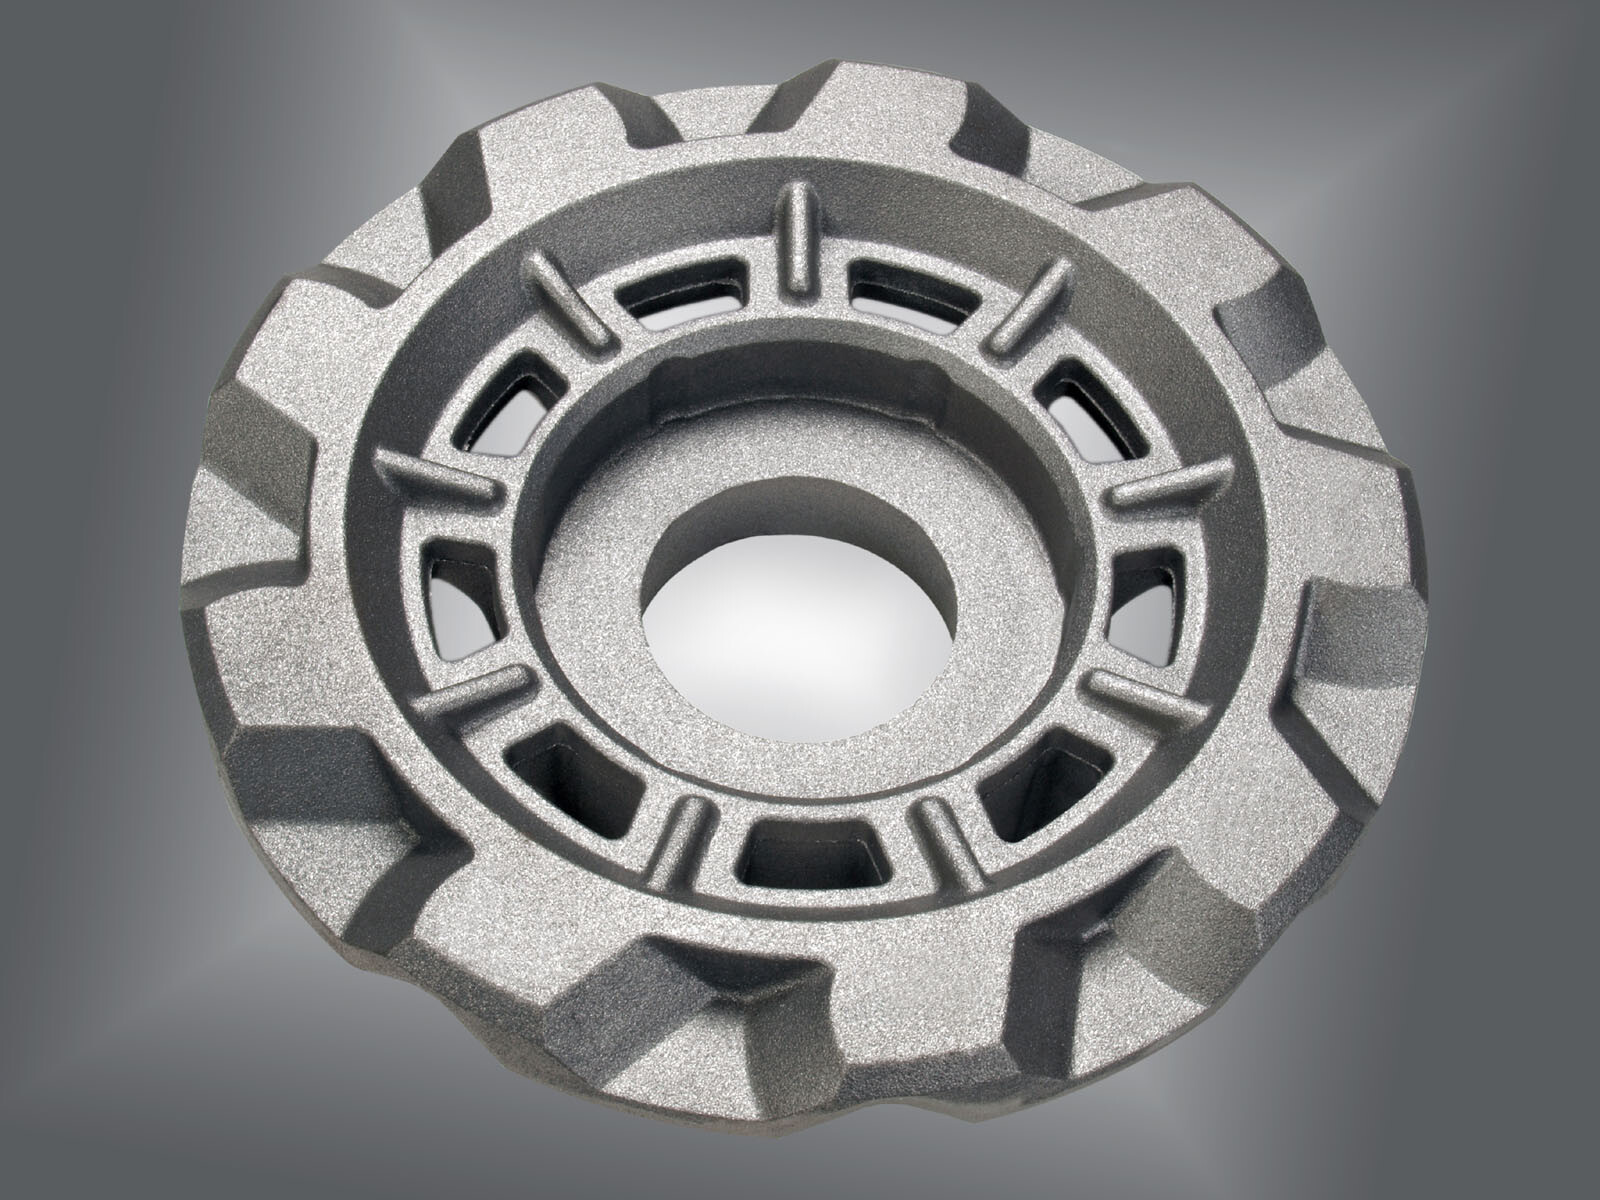 traction wheel for drivetrain application of a handling robot made of ductile cast iron with 150 kg part weight.